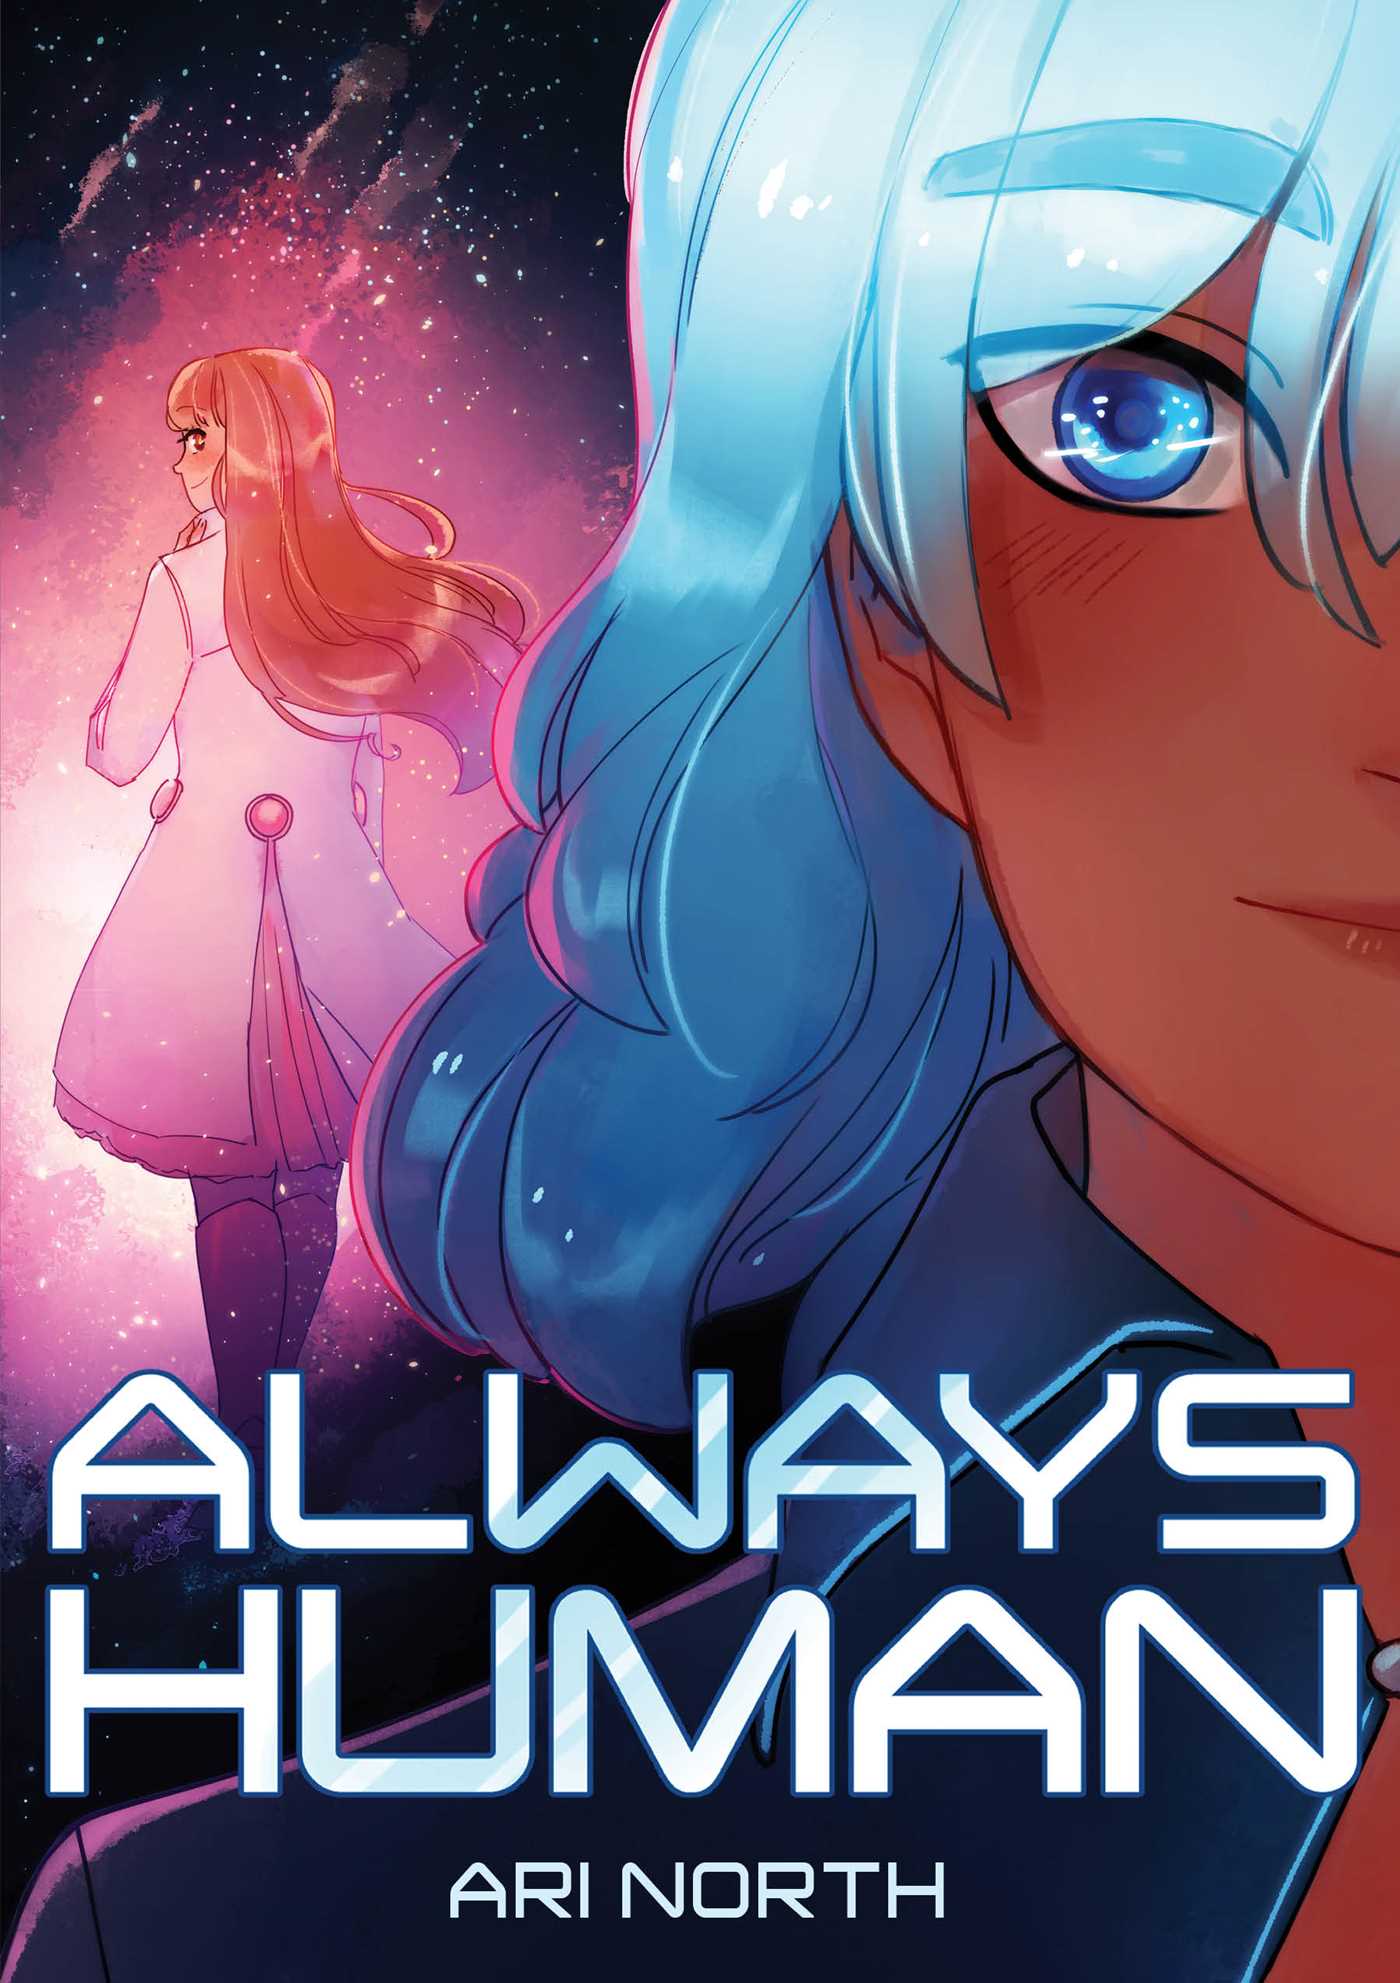 Always Human book cover